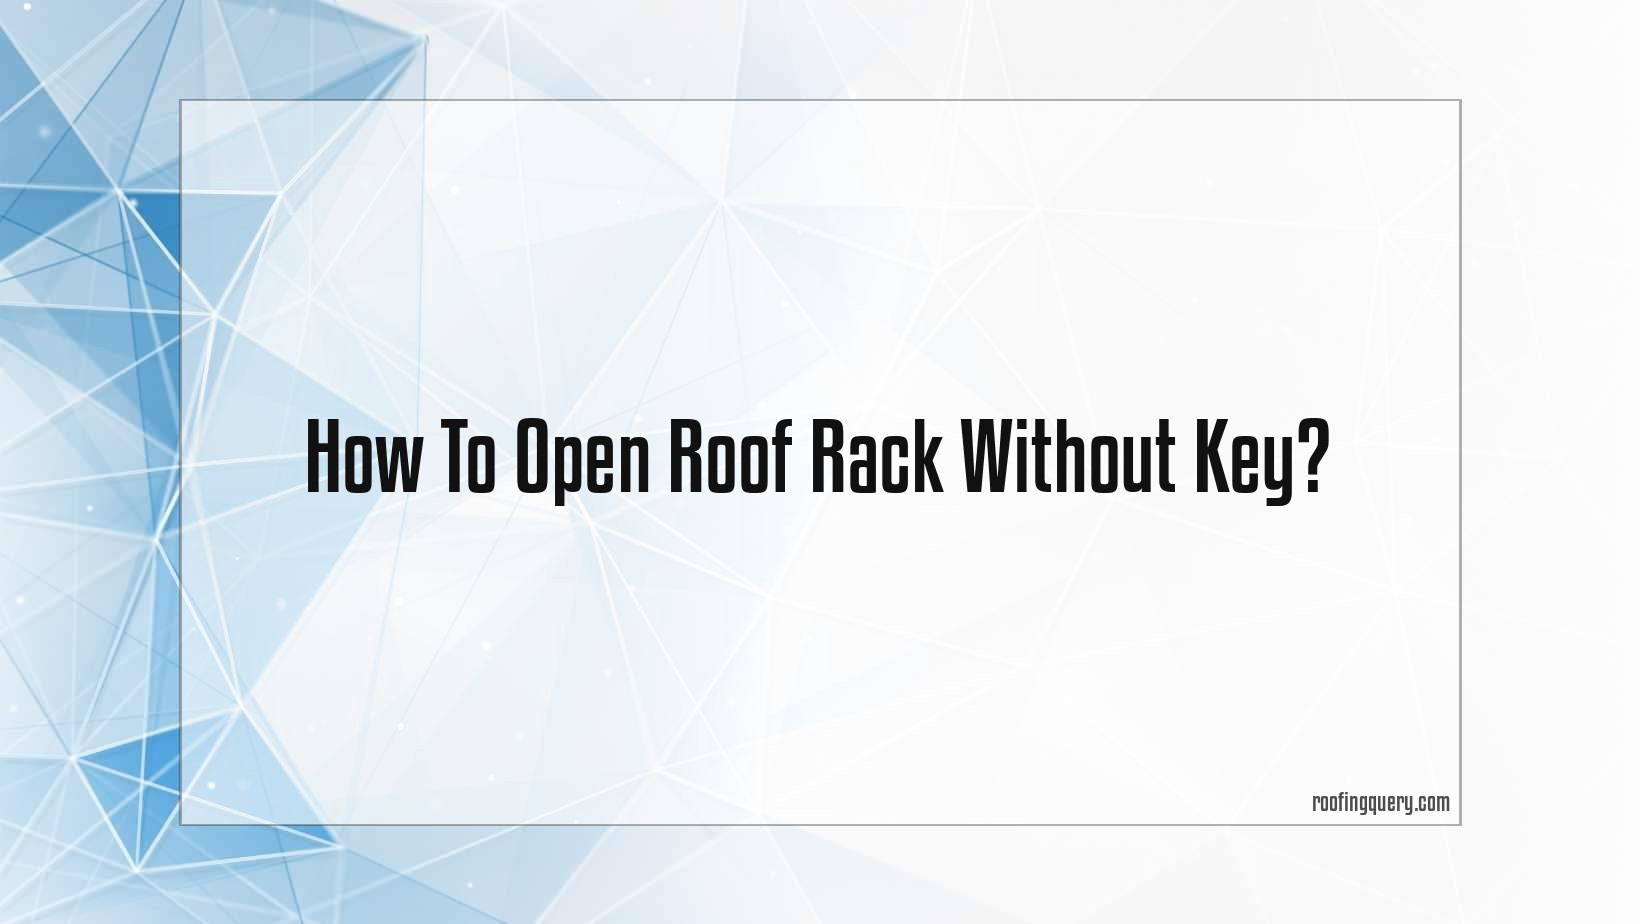 How To Open Roof Rack Without Key?